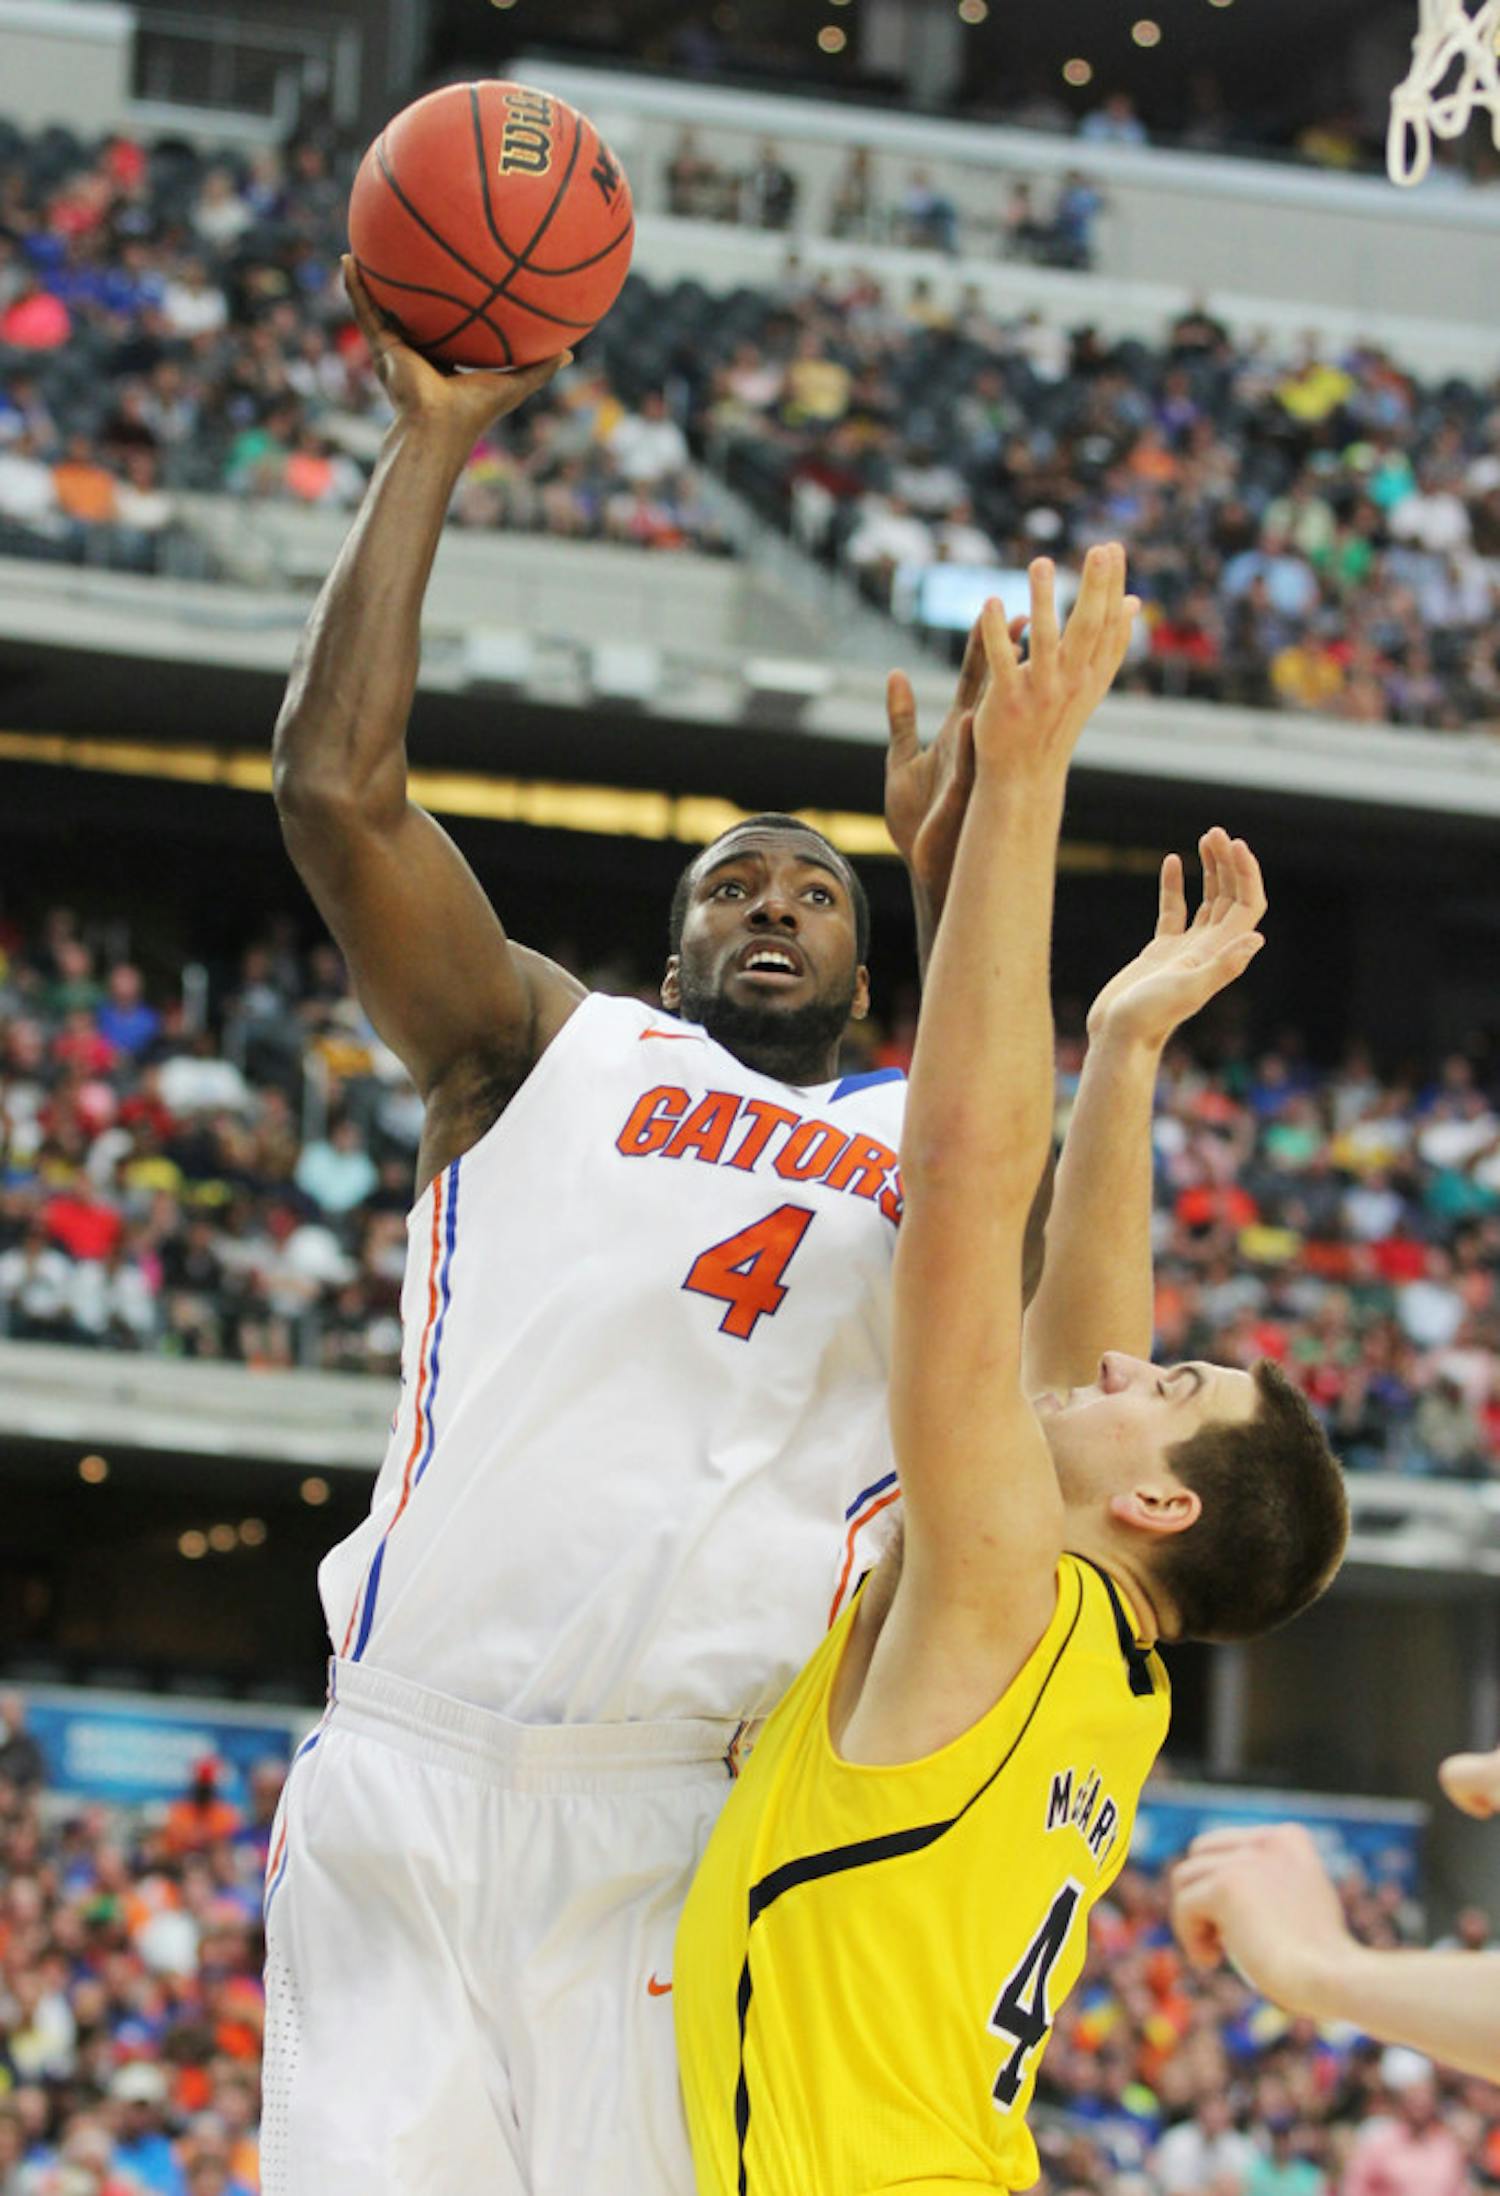 Center Patric Young attempts a shot during Florida’s 79-59 Elite Eight loss to Michigan on March 31 in Arlington, Texas.